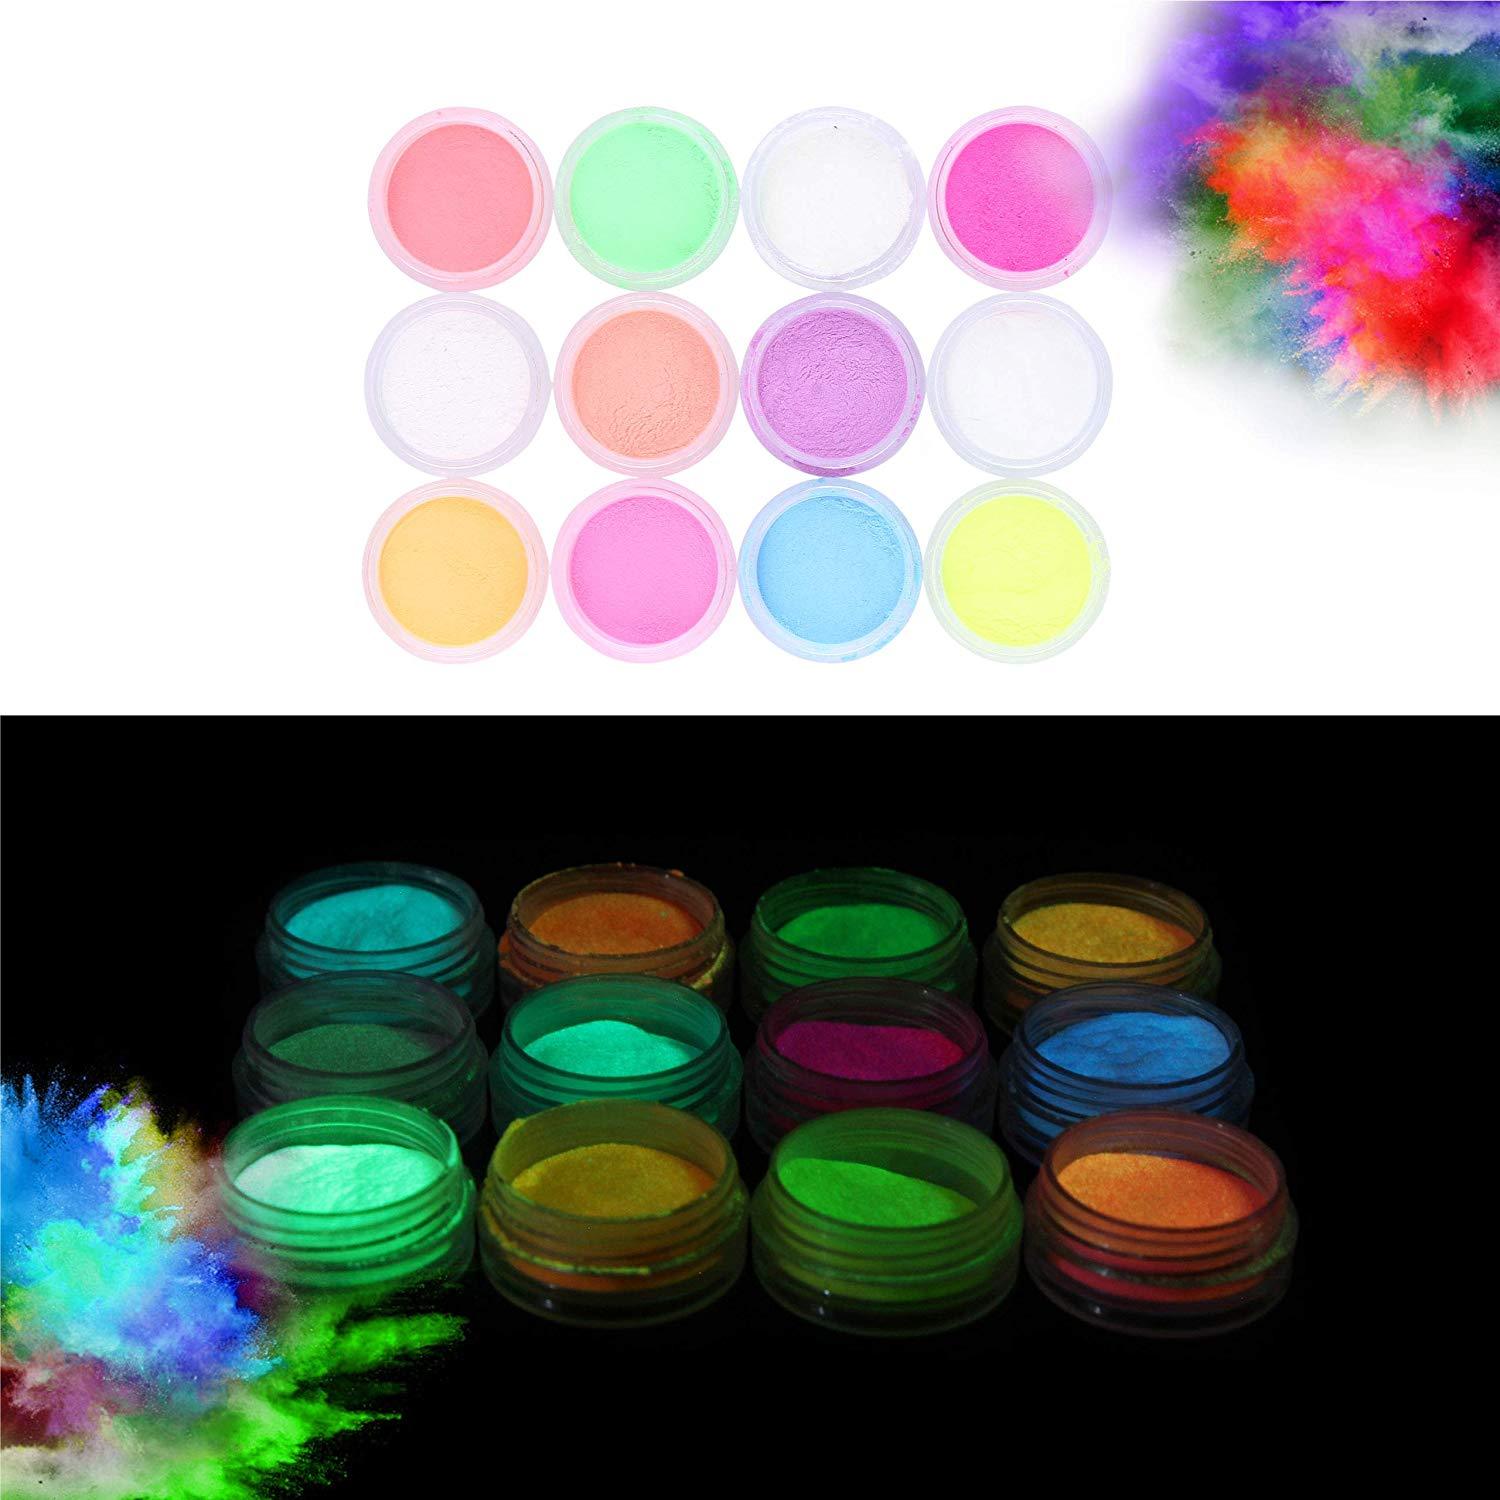 Glow in the Dark Powder - 72 PACK Bulk Party Supplies Favors and Decorations Works Great in addition with Sticks, Necklaces, Glasses, Luminous Pigment Powder Fluorescent UV Neon Dye Dust G - image 1 of 7